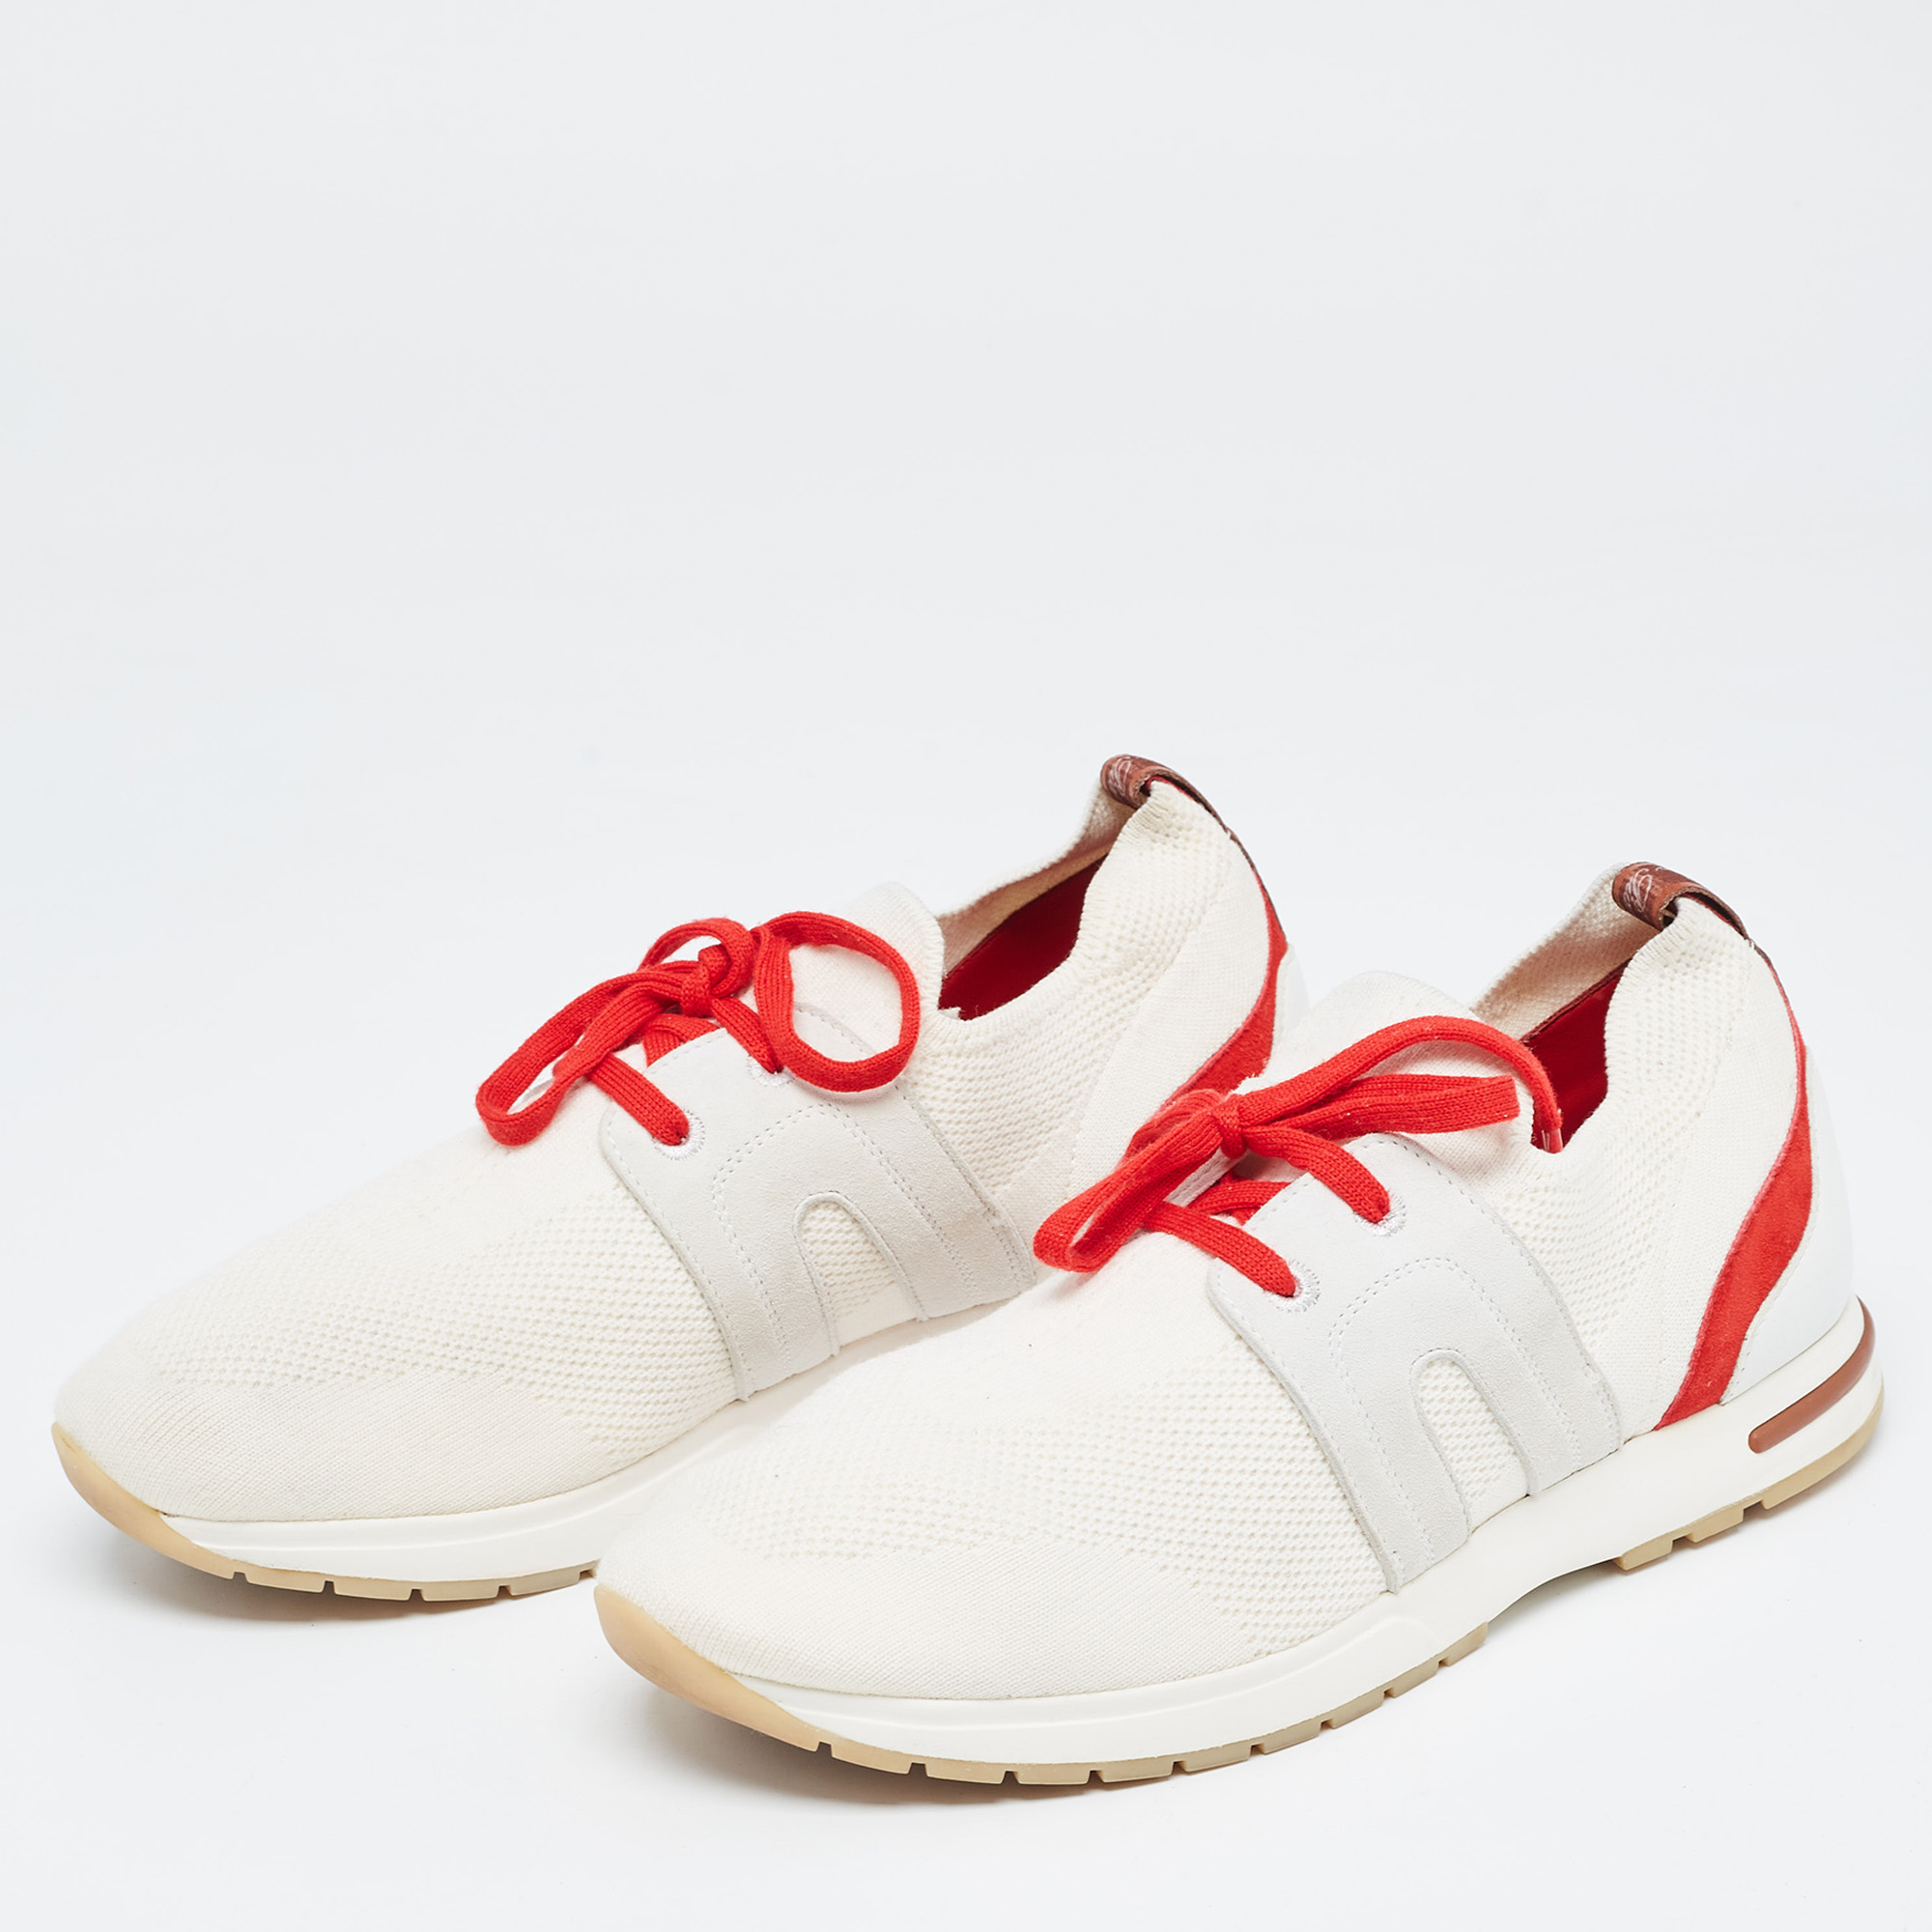 

Loro Piana Off White/Red Knit Fabric and Suede 360 LP Flexy Walk Sneakers Size